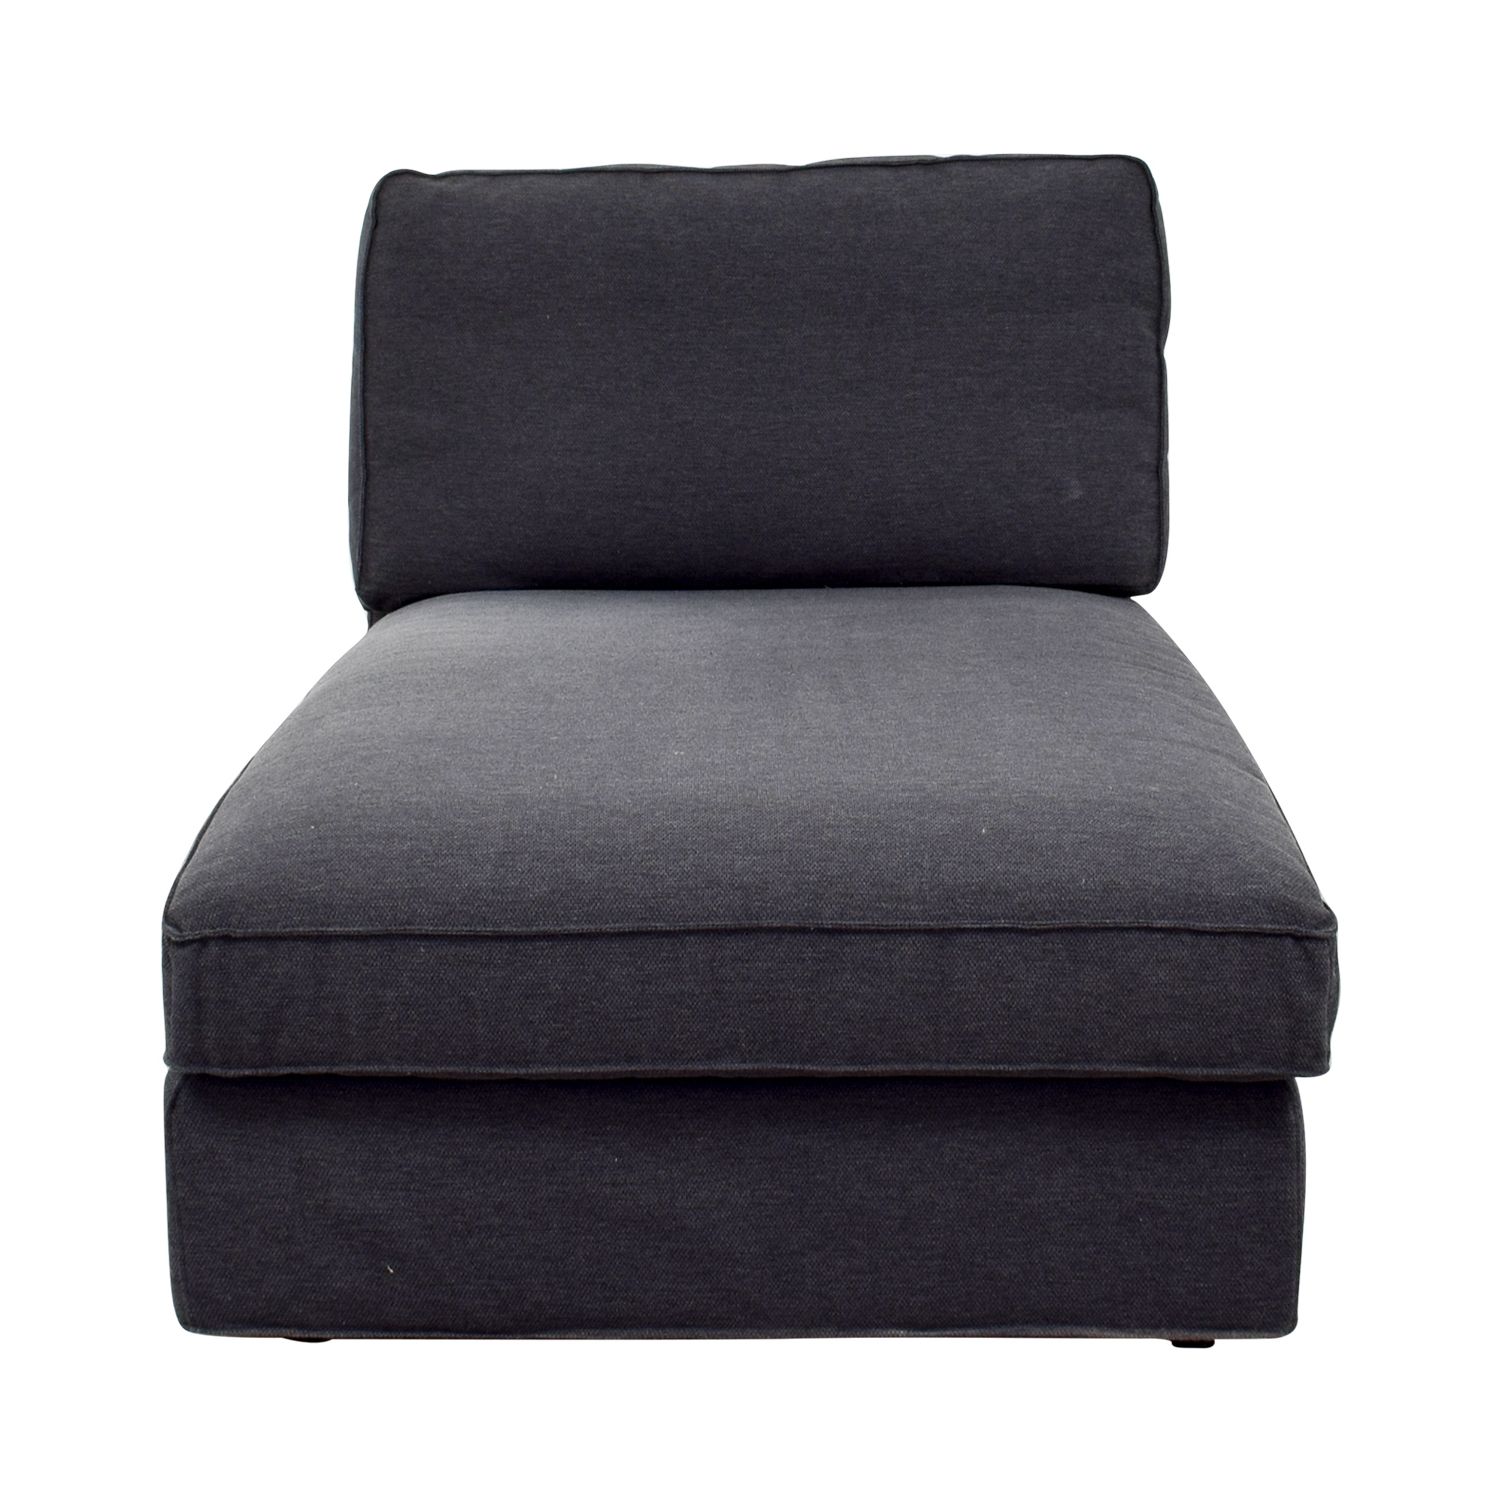 [%86% Off – Pottery Barn Pottery Barn Chaise Lounge / Sofas Regarding Newest Pottery Barn Chaise Lounges|Pottery Barn Chaise Lounges Pertaining To Famous 86% Off – Pottery Barn Pottery Barn Chaise Lounge / Sofas|Popular Pottery Barn Chaise Lounges Inside 86% Off – Pottery Barn Pottery Barn Chaise Lounge / Sofas|Widely Used 86% Off – Pottery Barn Pottery Barn Chaise Lounge / Sofas Regarding Pottery Barn Chaise Lounges%] (View 8 of 15)